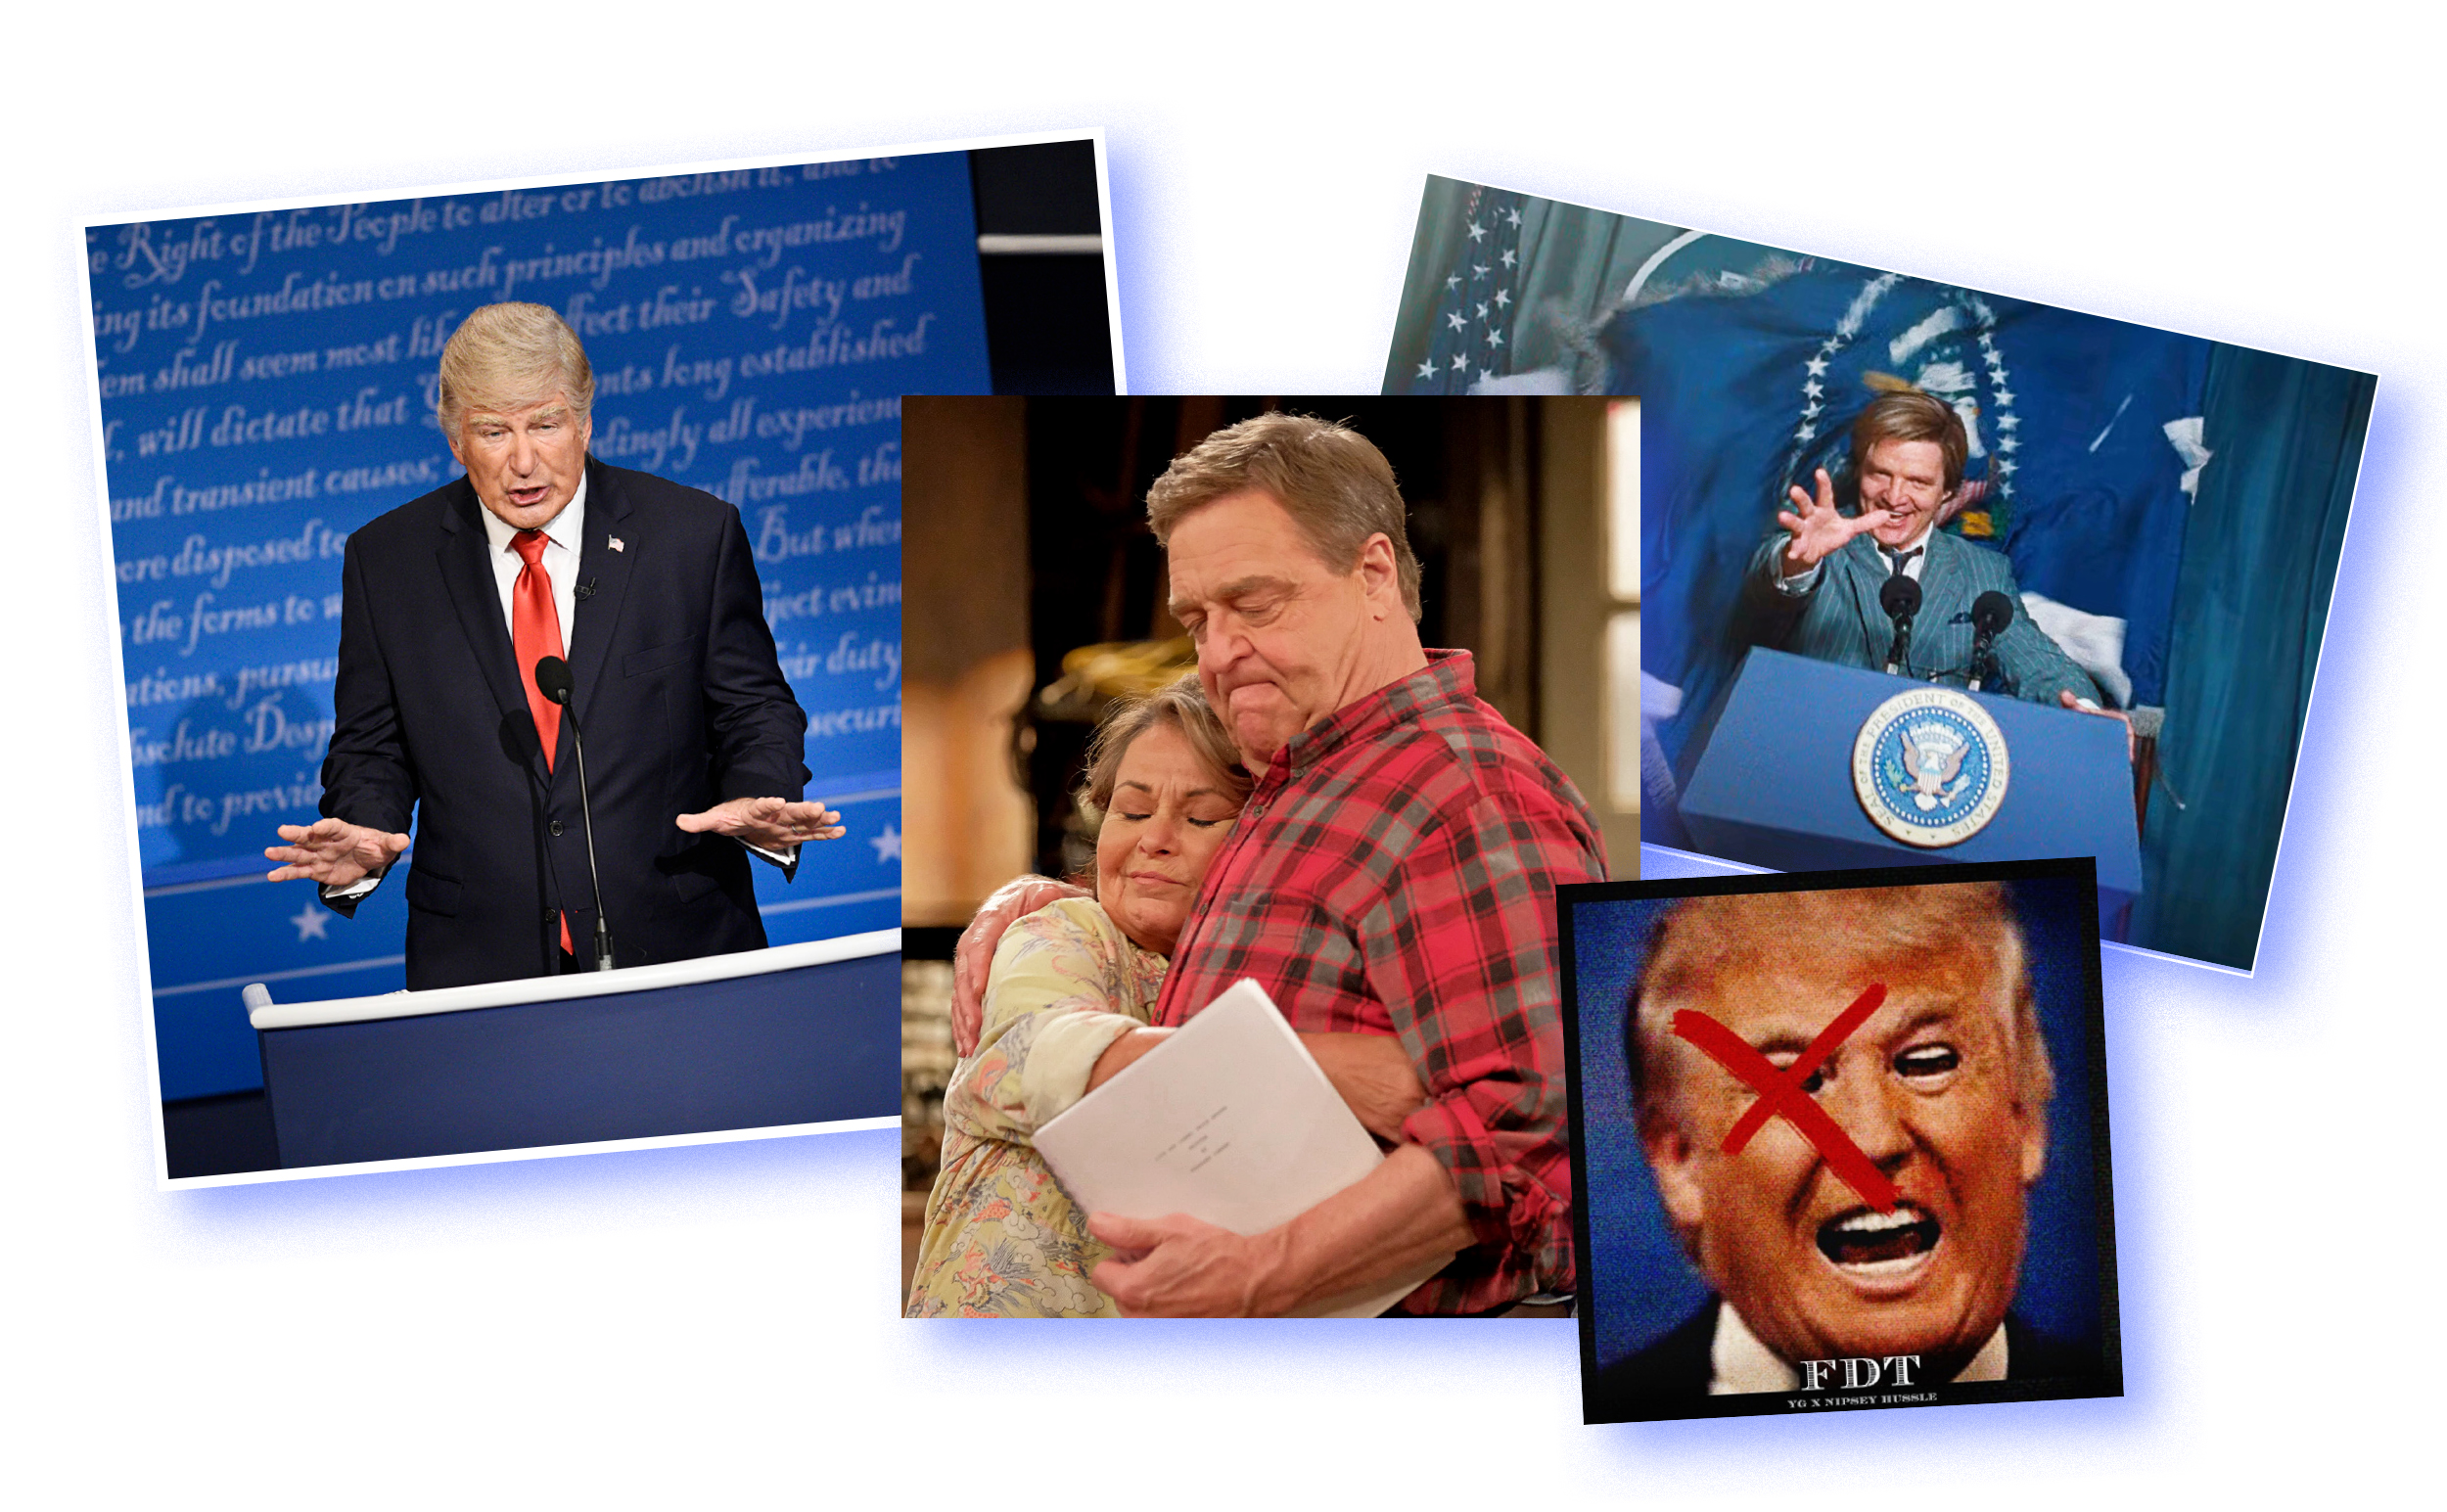 Alec Baldwin on 'Saturday Night Live'; Roseanne Barr and John Goodman on 'Roseanne'; Pedro Pascal in 'Wonder Woman 1984'; artwork for the song 'FDT' by YG and Nipsey Hussle (NBC/Getty images; Adam Rose—ABC/Kobal/Shutterstock; Warner Bros.;Everett Collection)